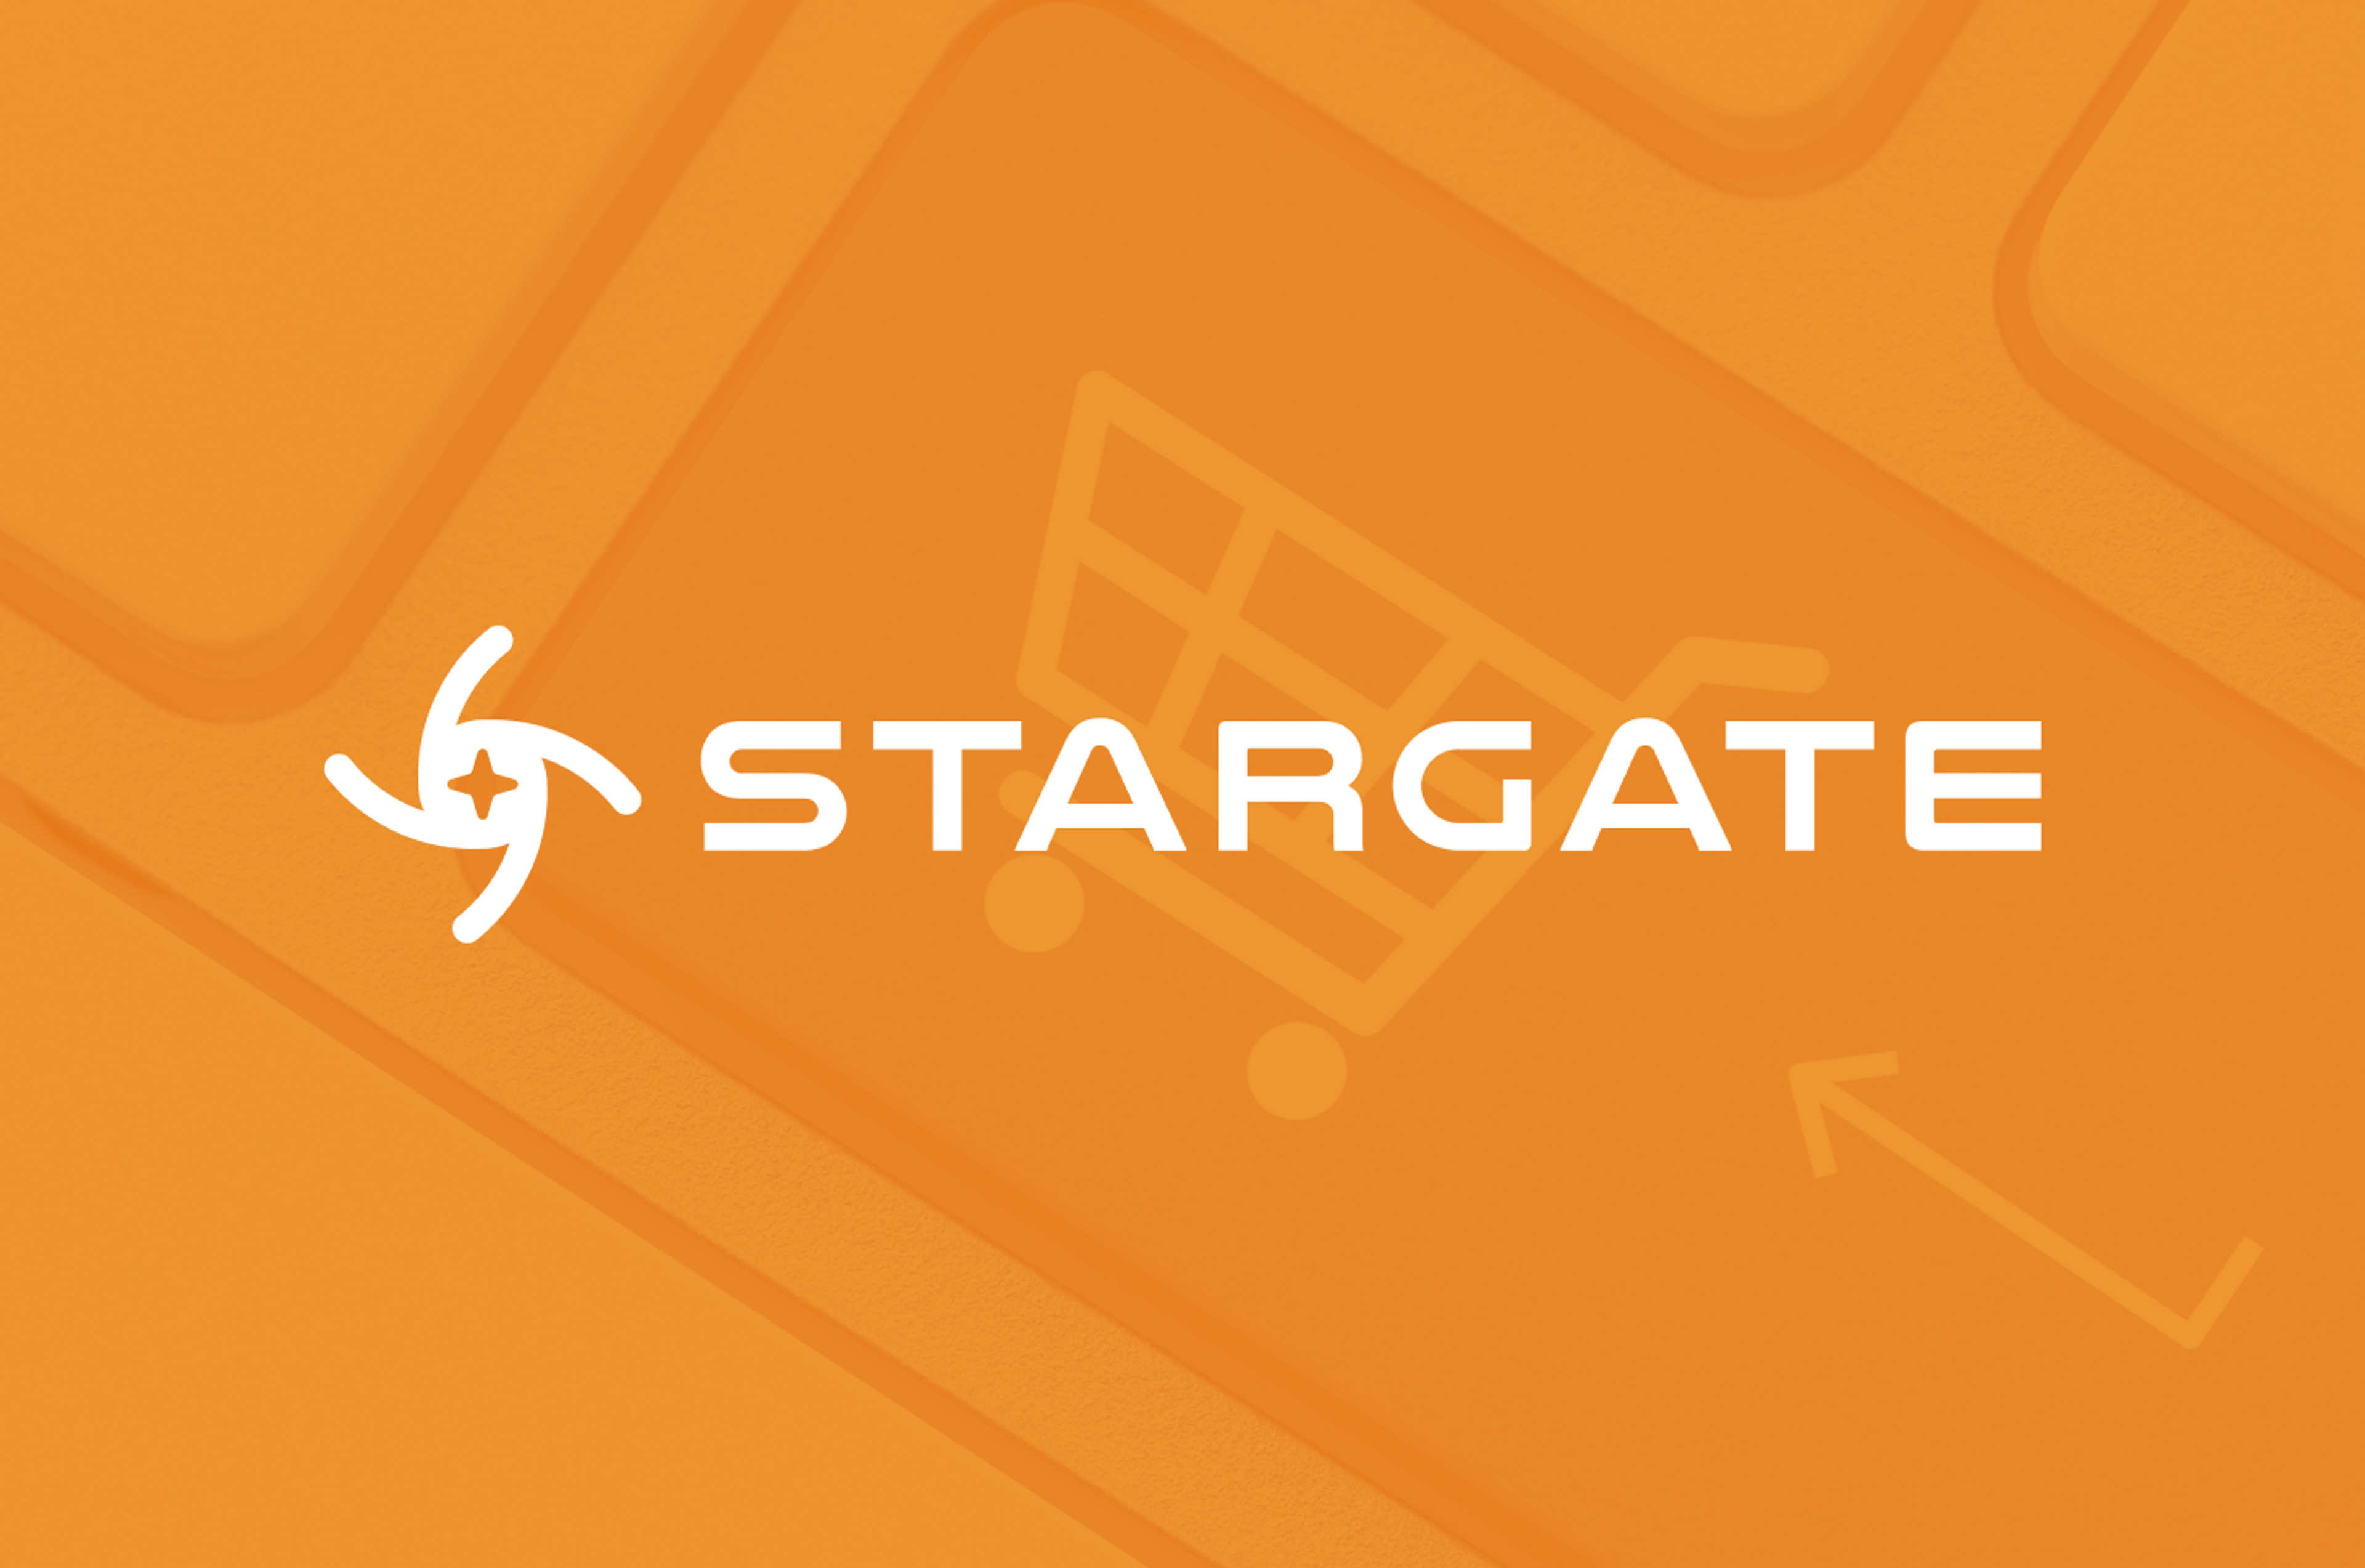 Stargate comes to AWS Marketplace for Apache Cassandra